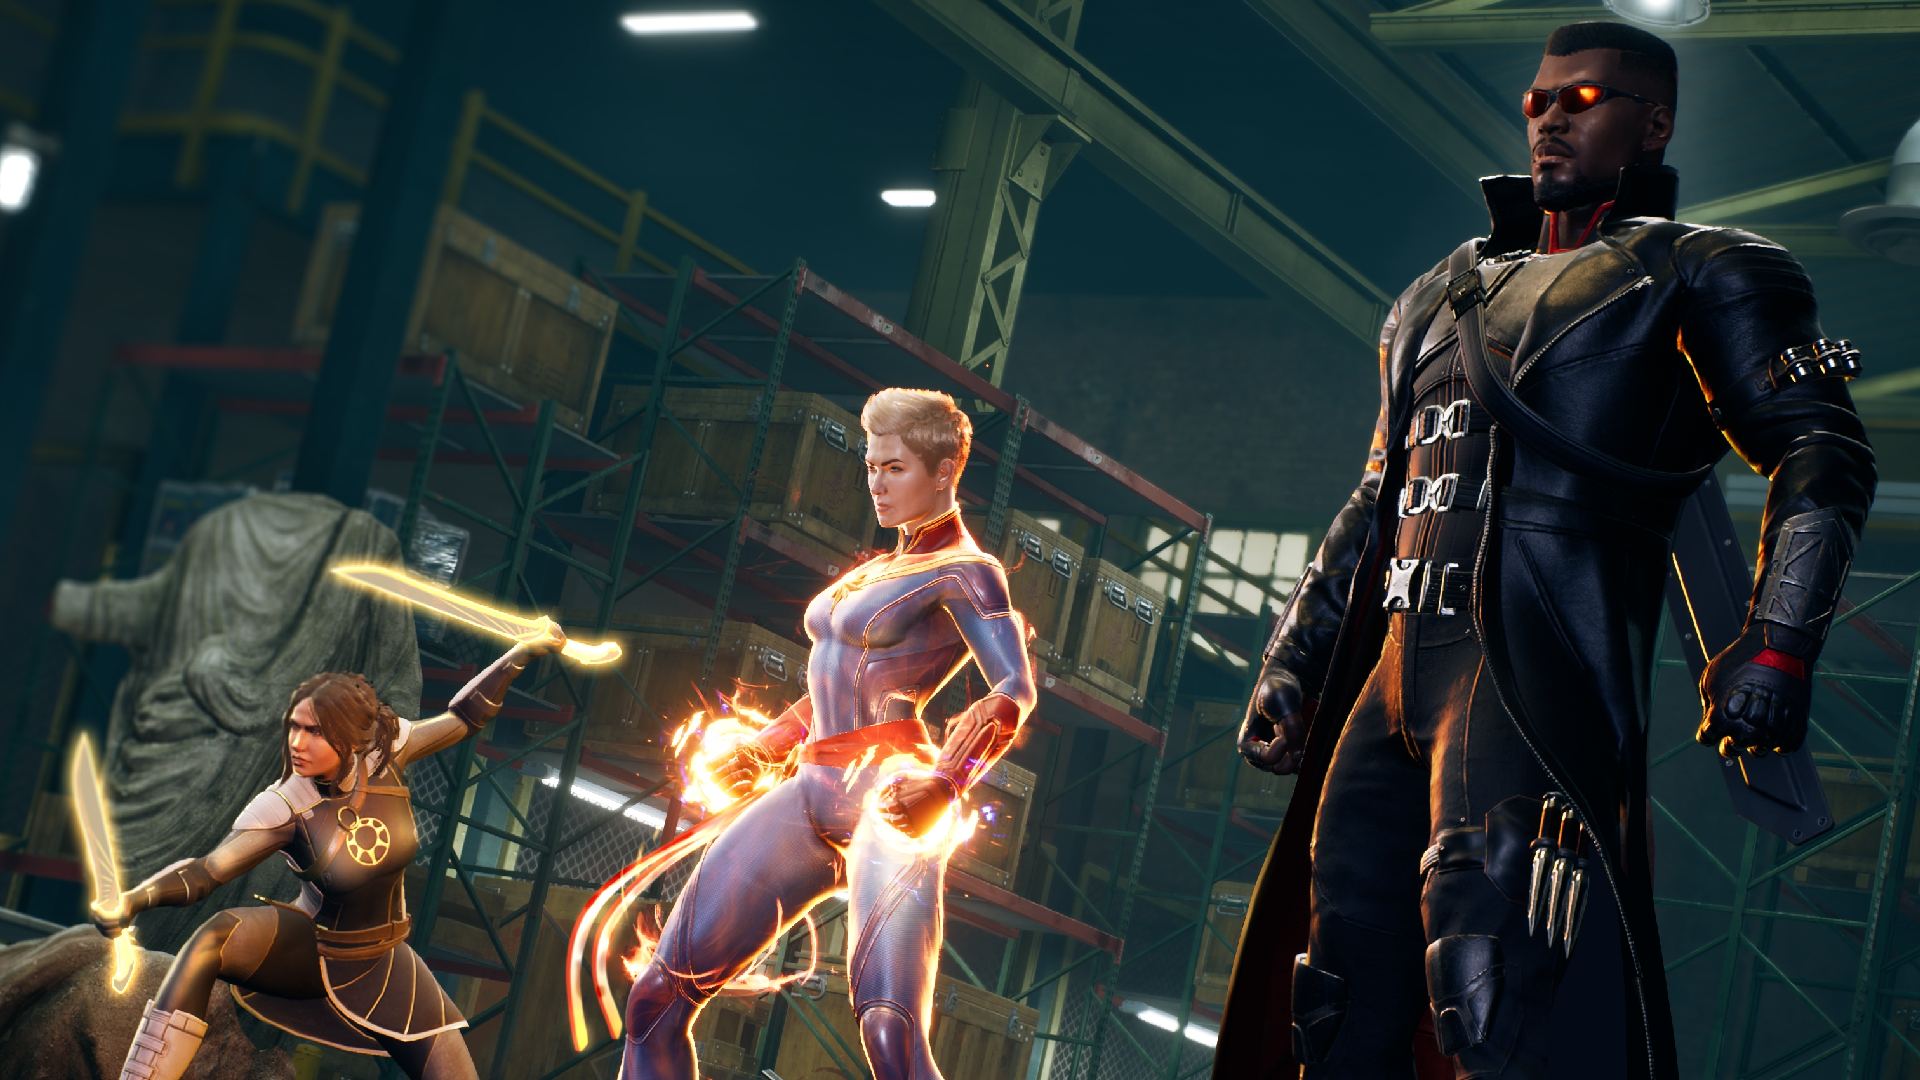 Fact Check: Does Marvel's Midnight Suns have multiplayer co-op or PvP?